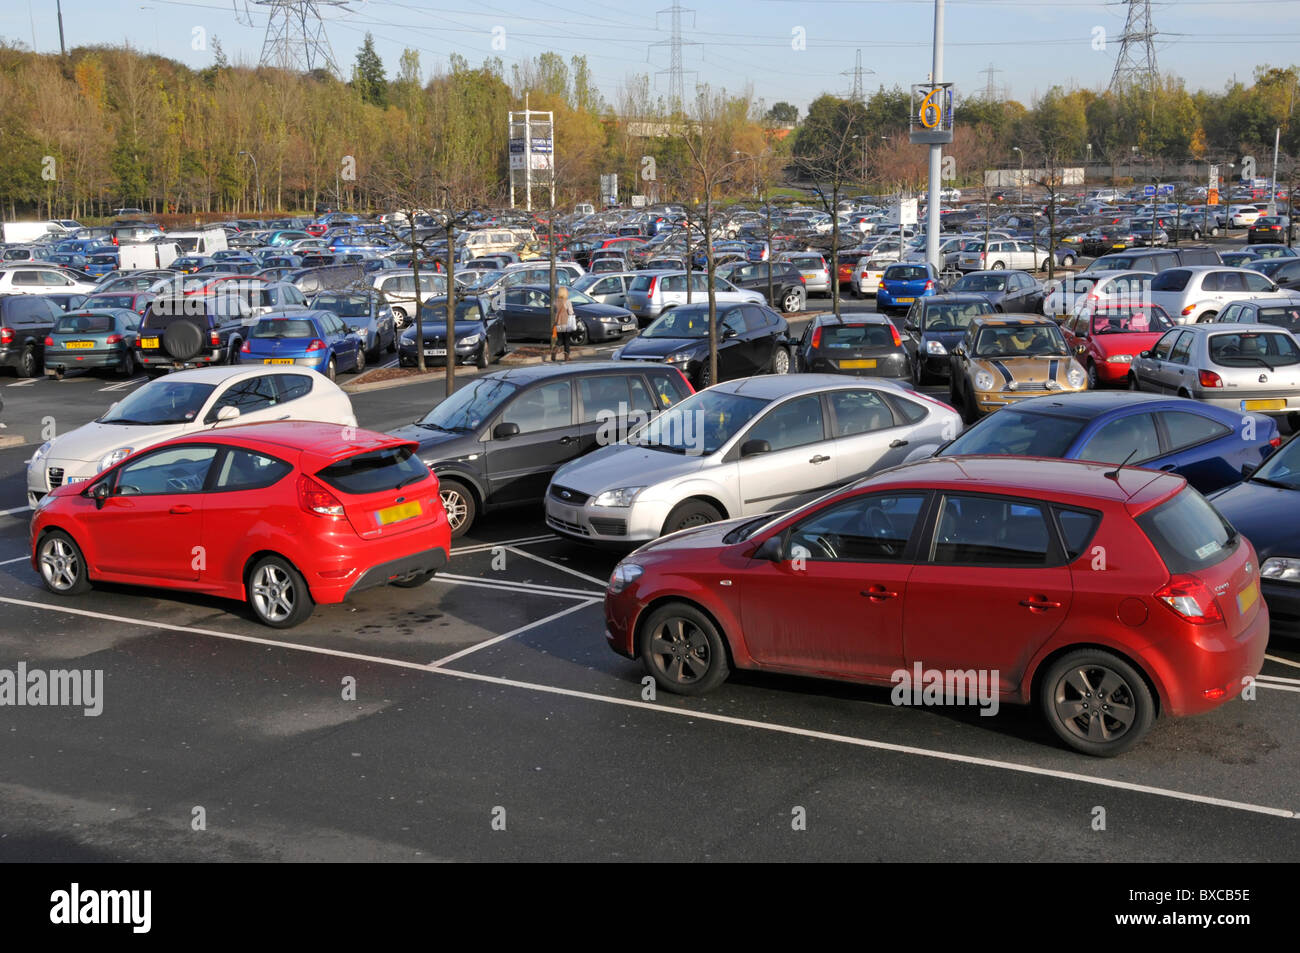 Packed shoppers free car parking bays outside the Lakeside indoor shopping malls complex at West Thurrock Essex England UK Stock Photo